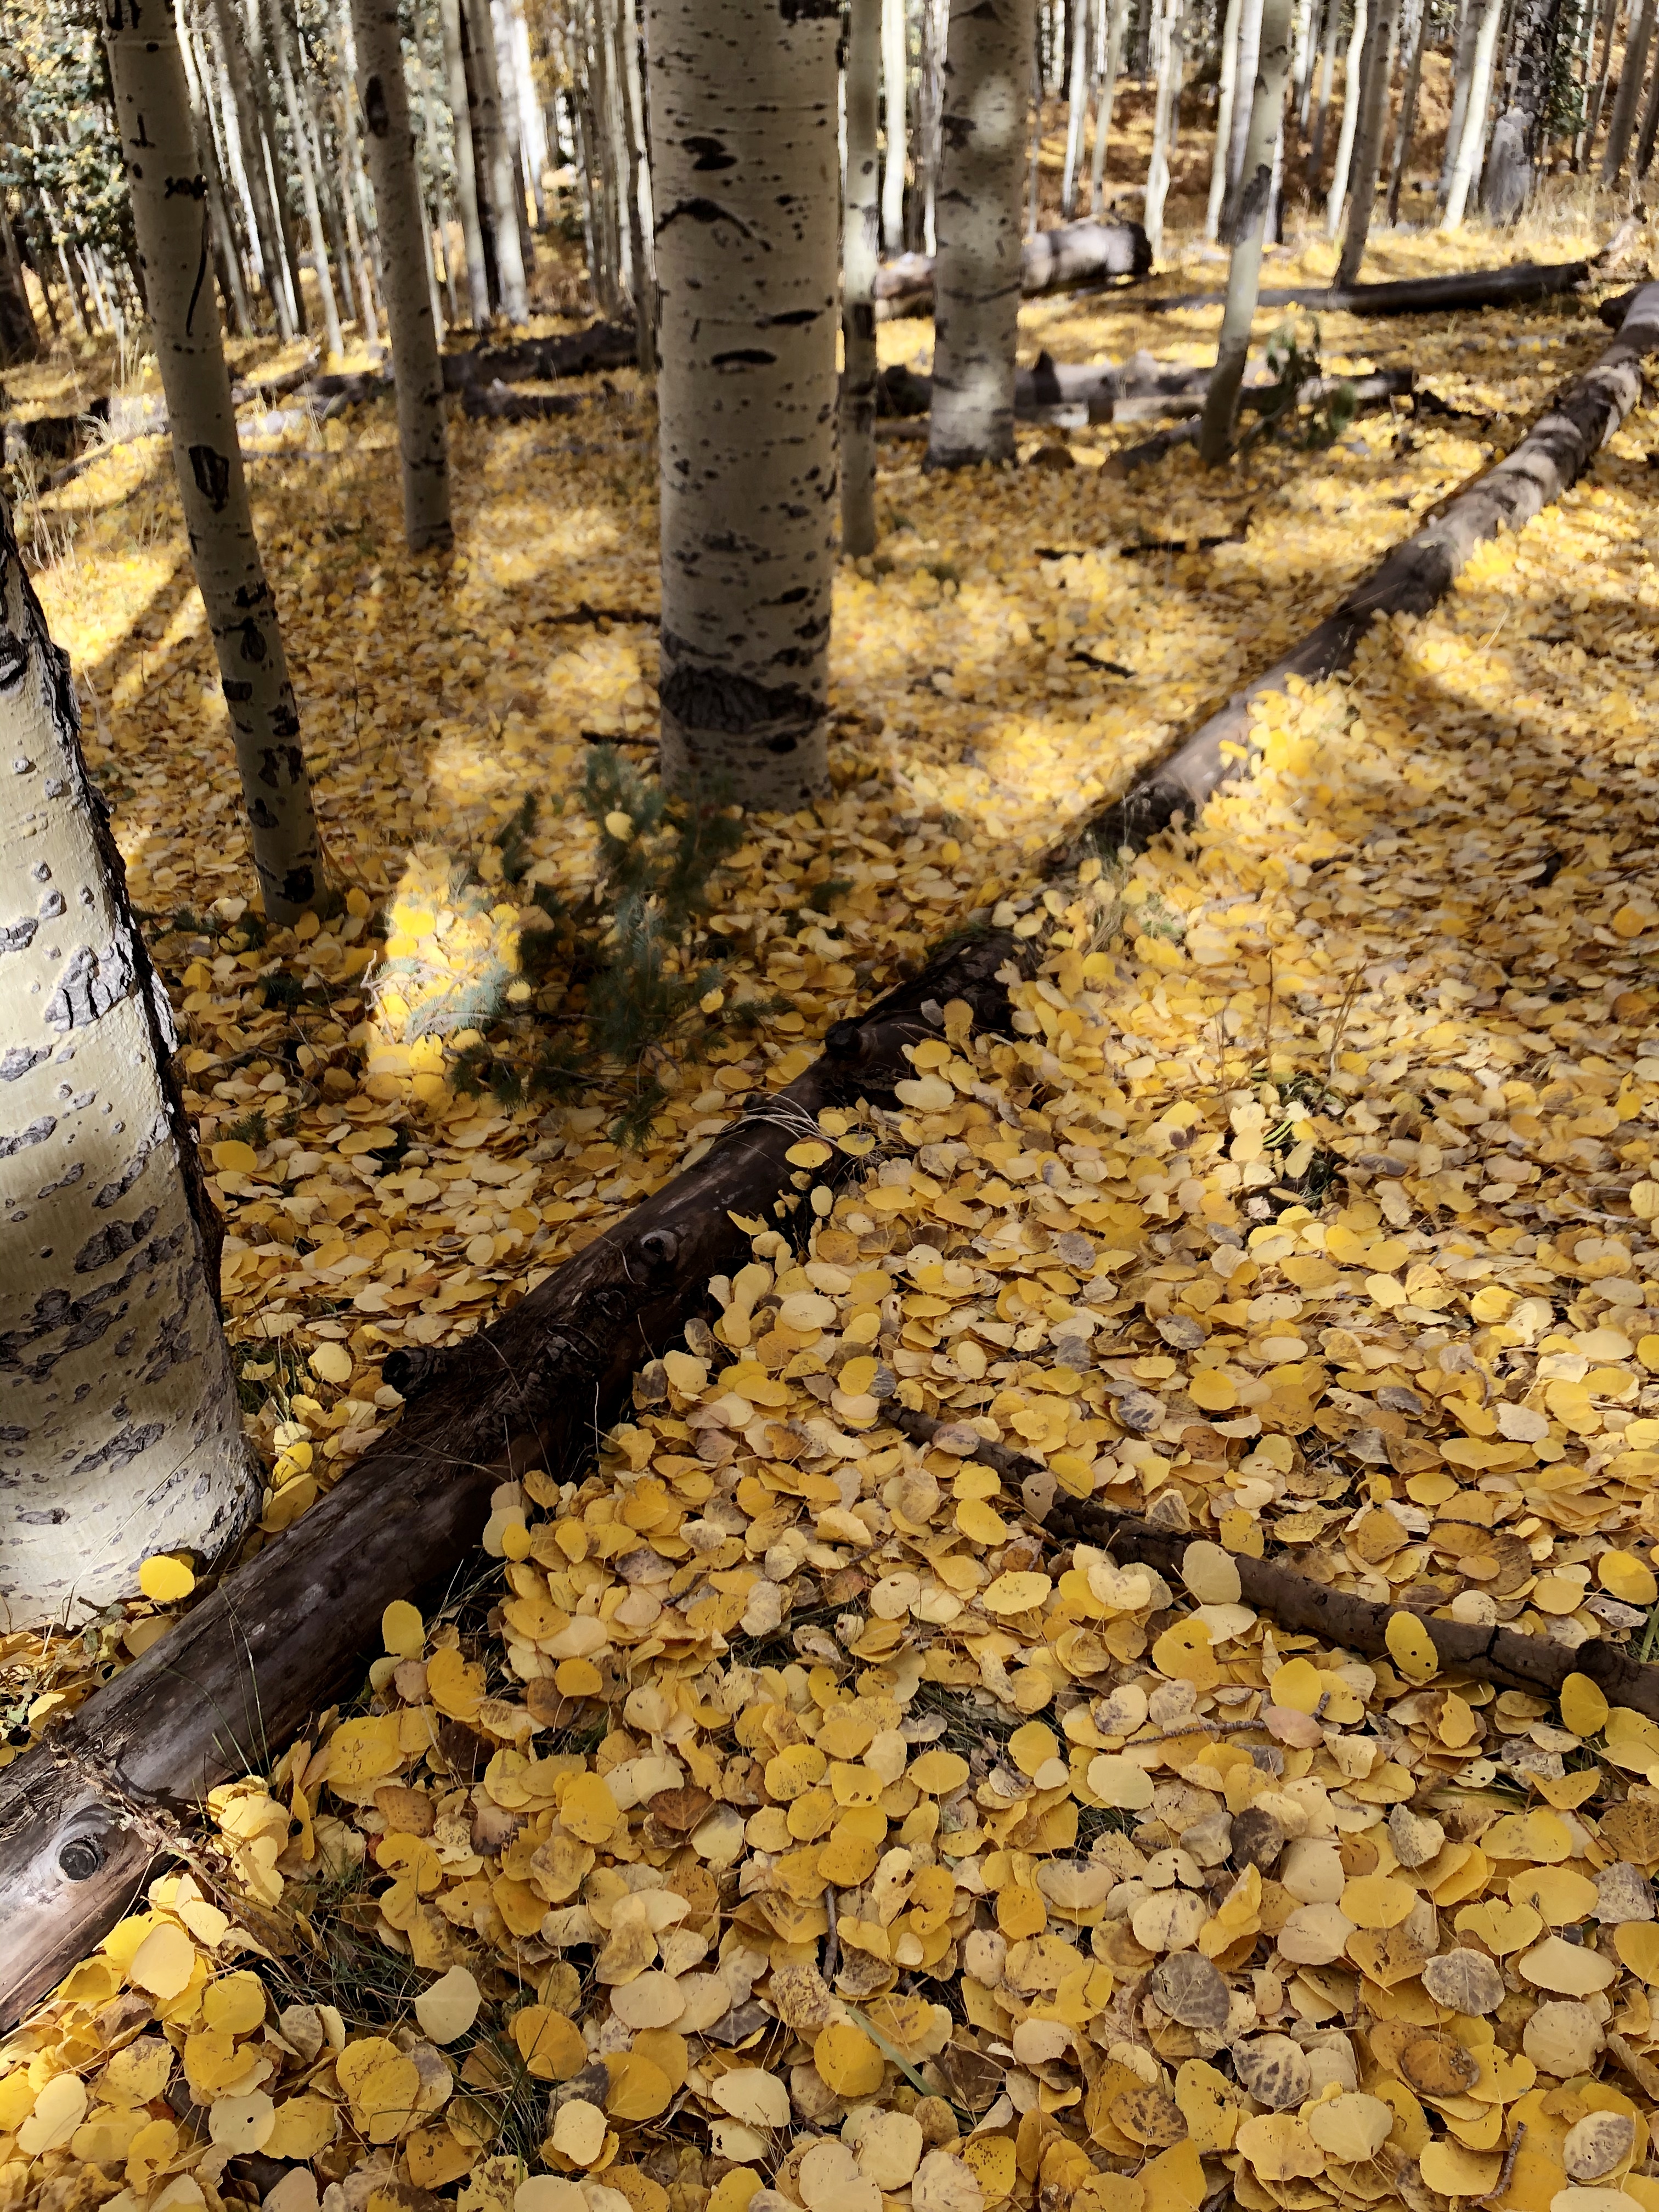 Aspen leaves covering the ground